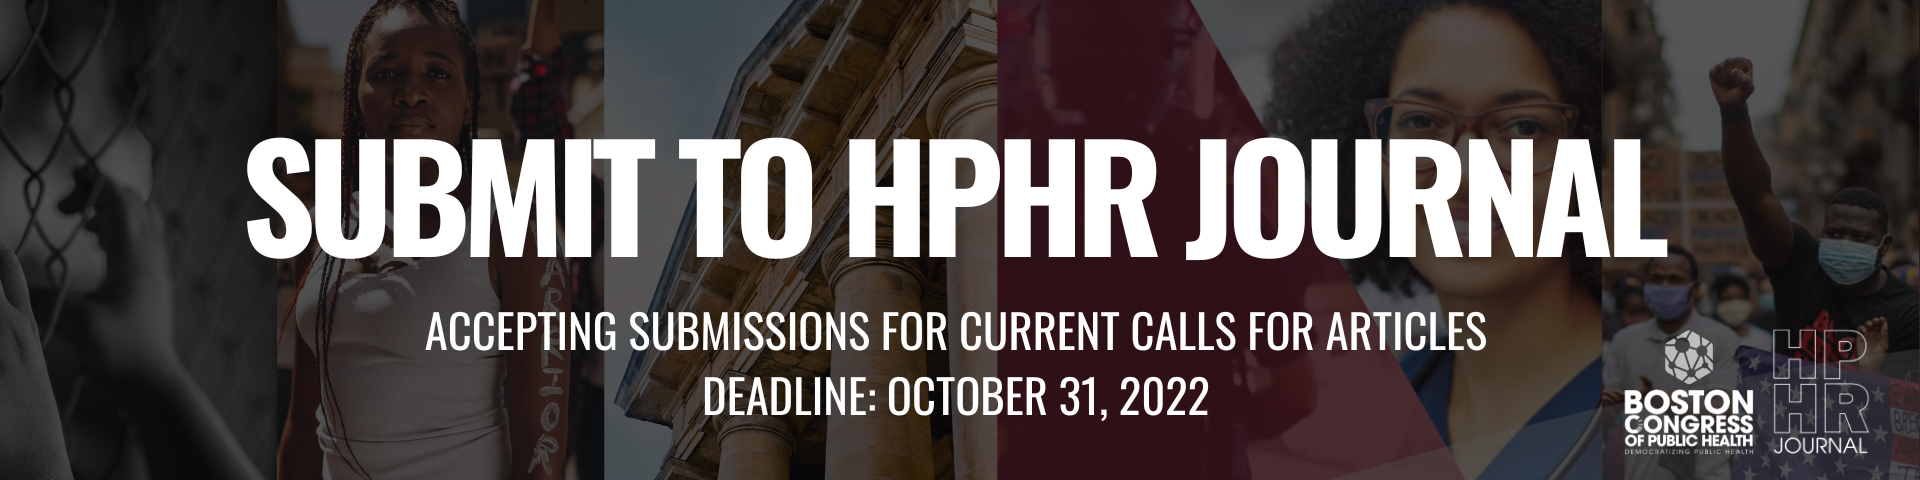 Submit to HPHR